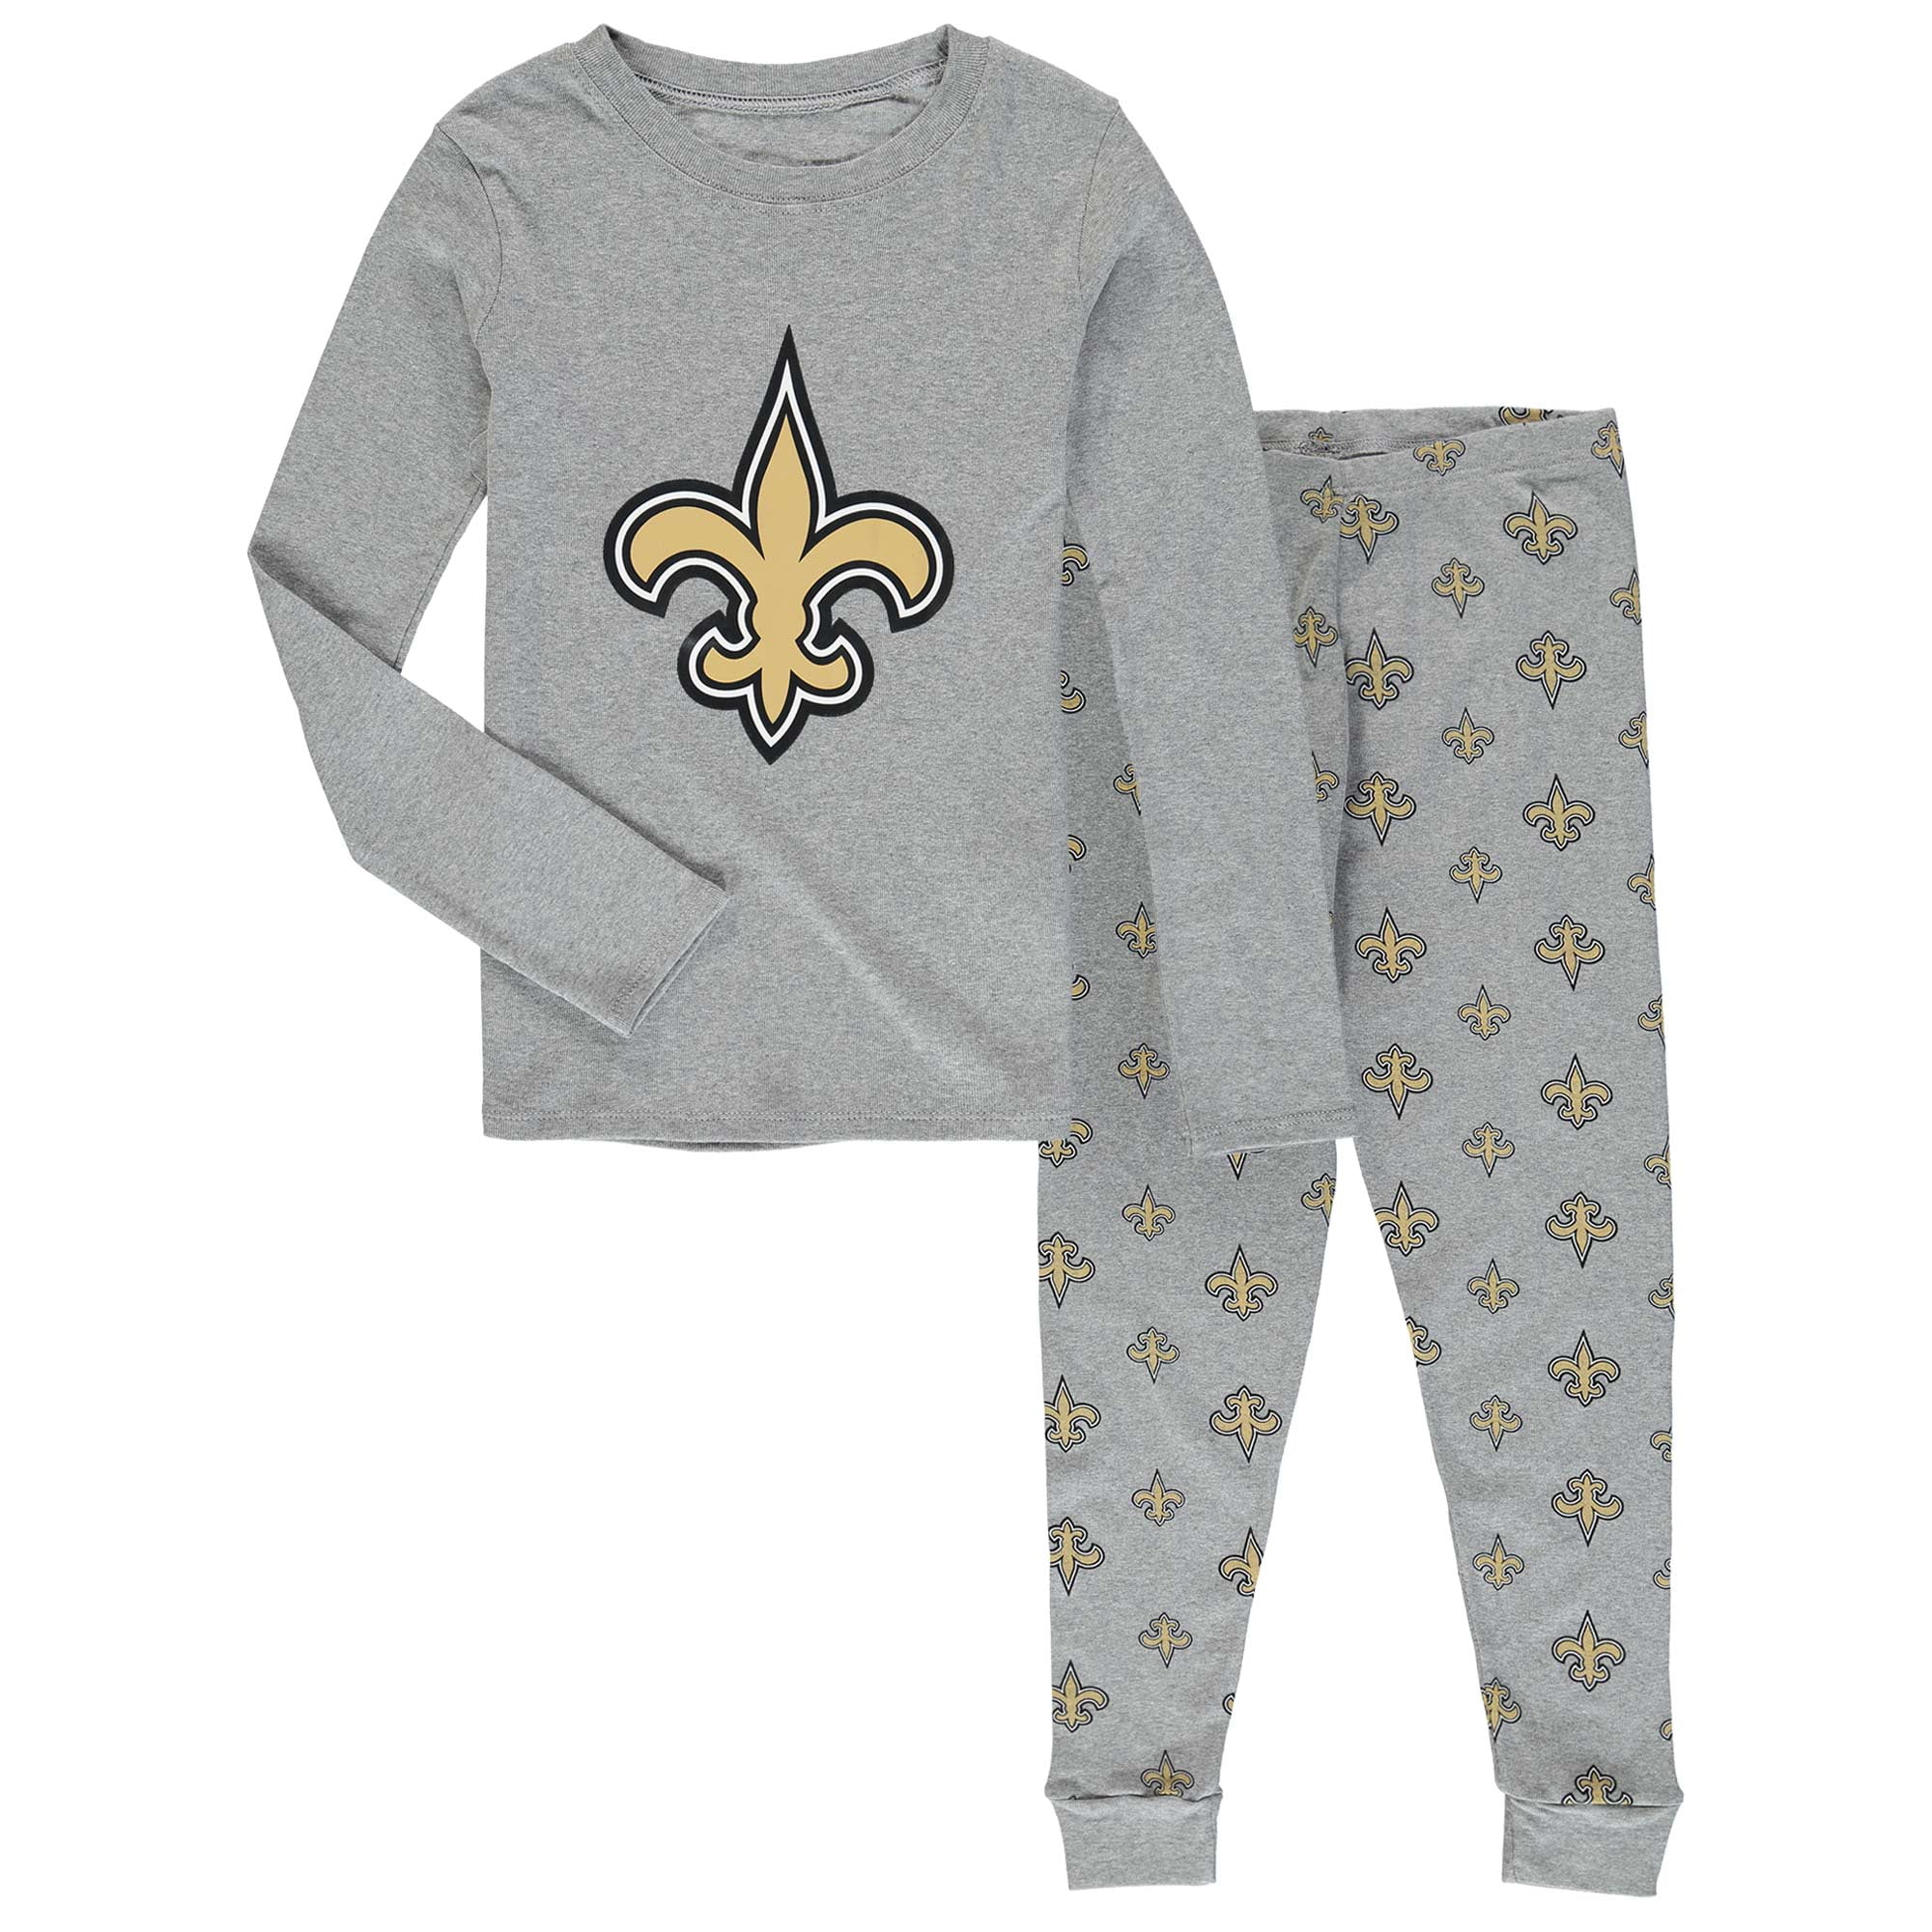 new orleans saints youth shirts